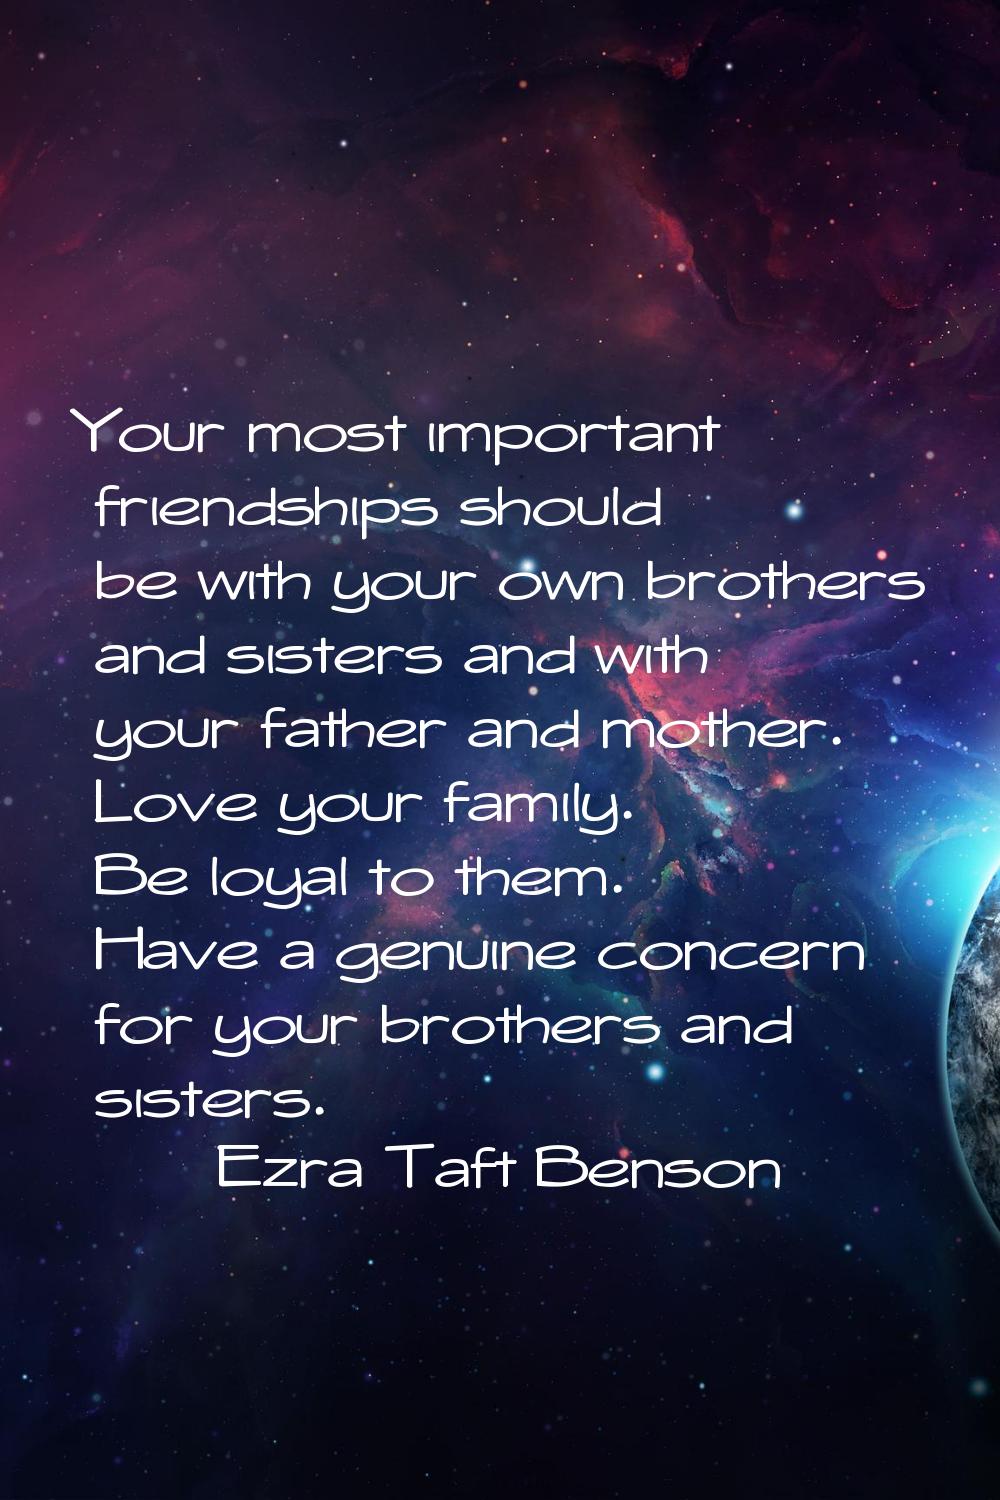 Your most important friendships should be with your own brothers and sisters and with your father a